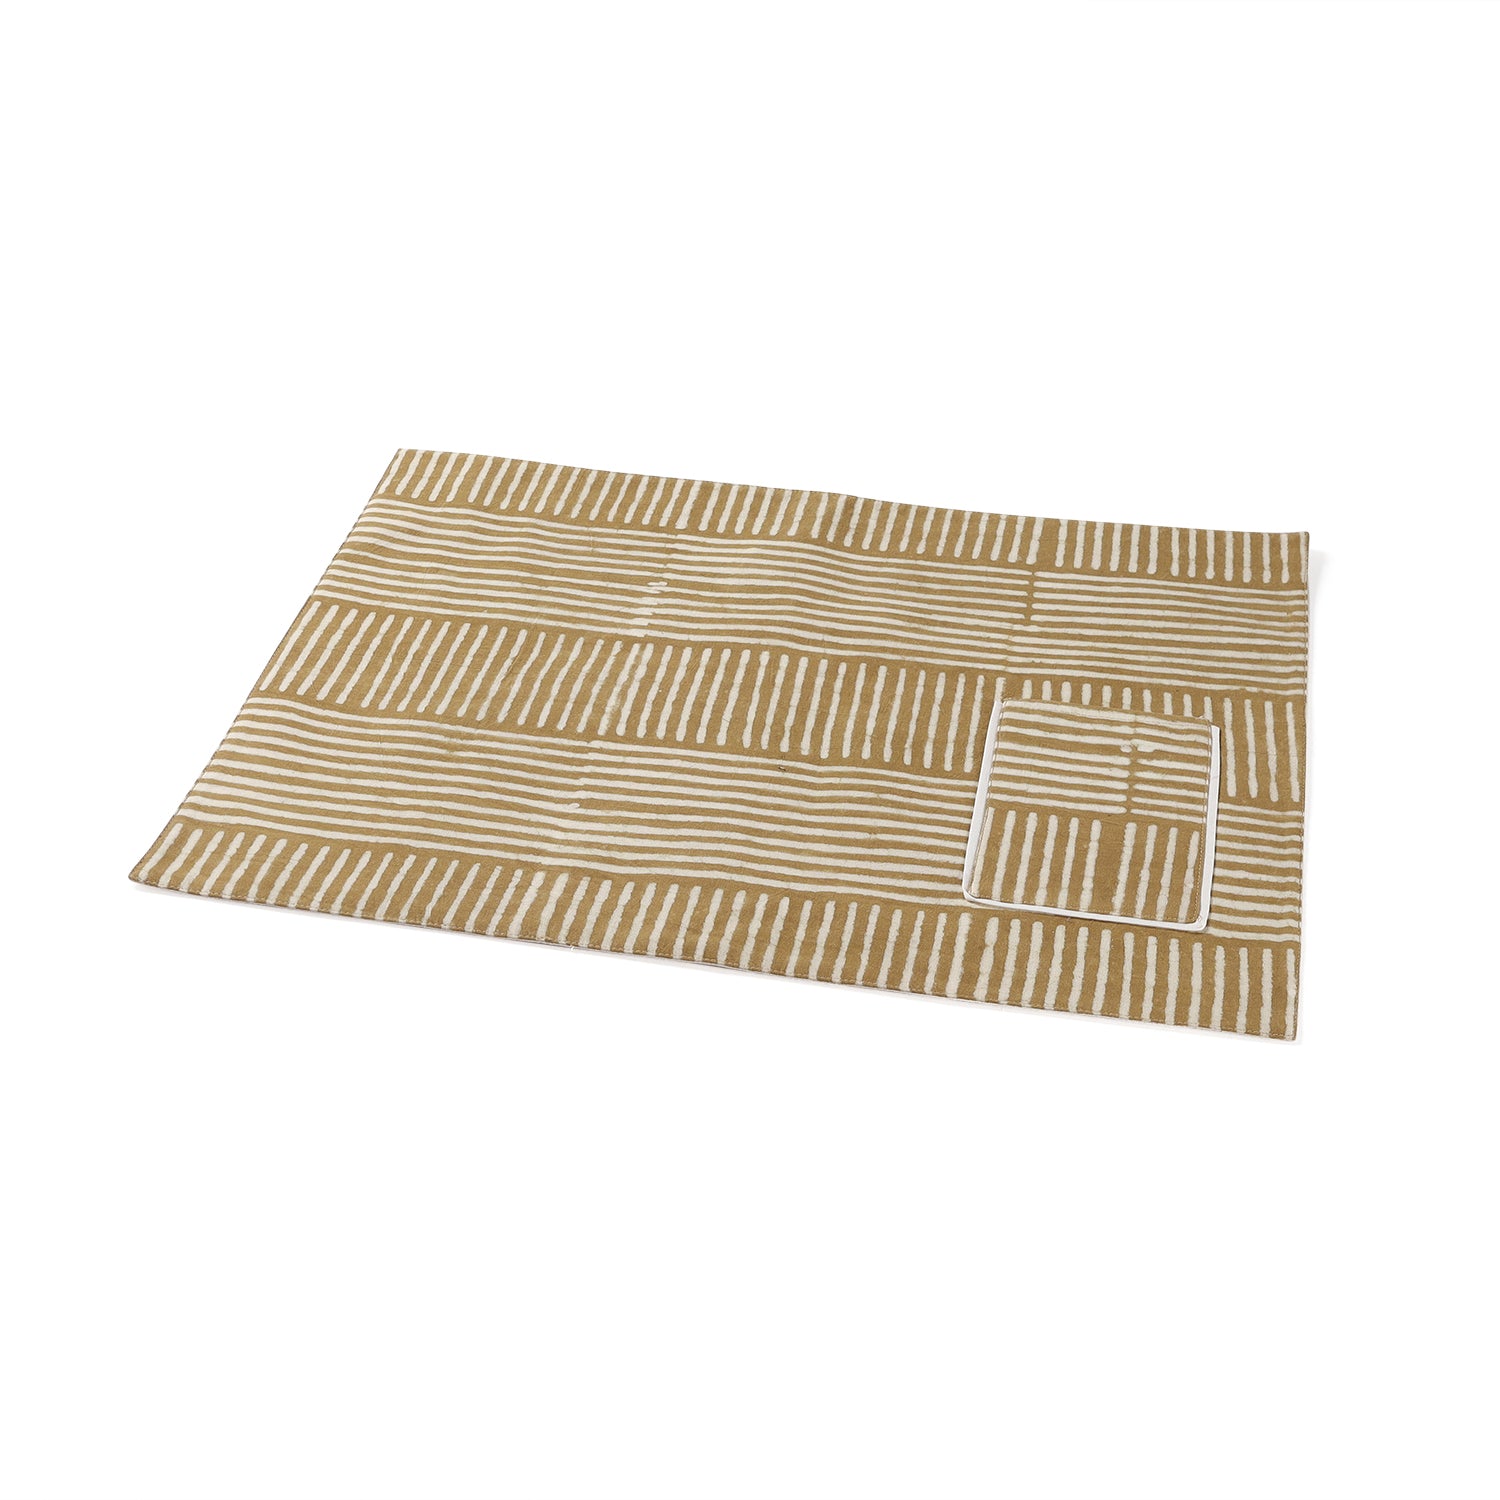 Dabu Table Mats in Muddy Green & White Stripes with Pockets - Set of 2- 14x18"